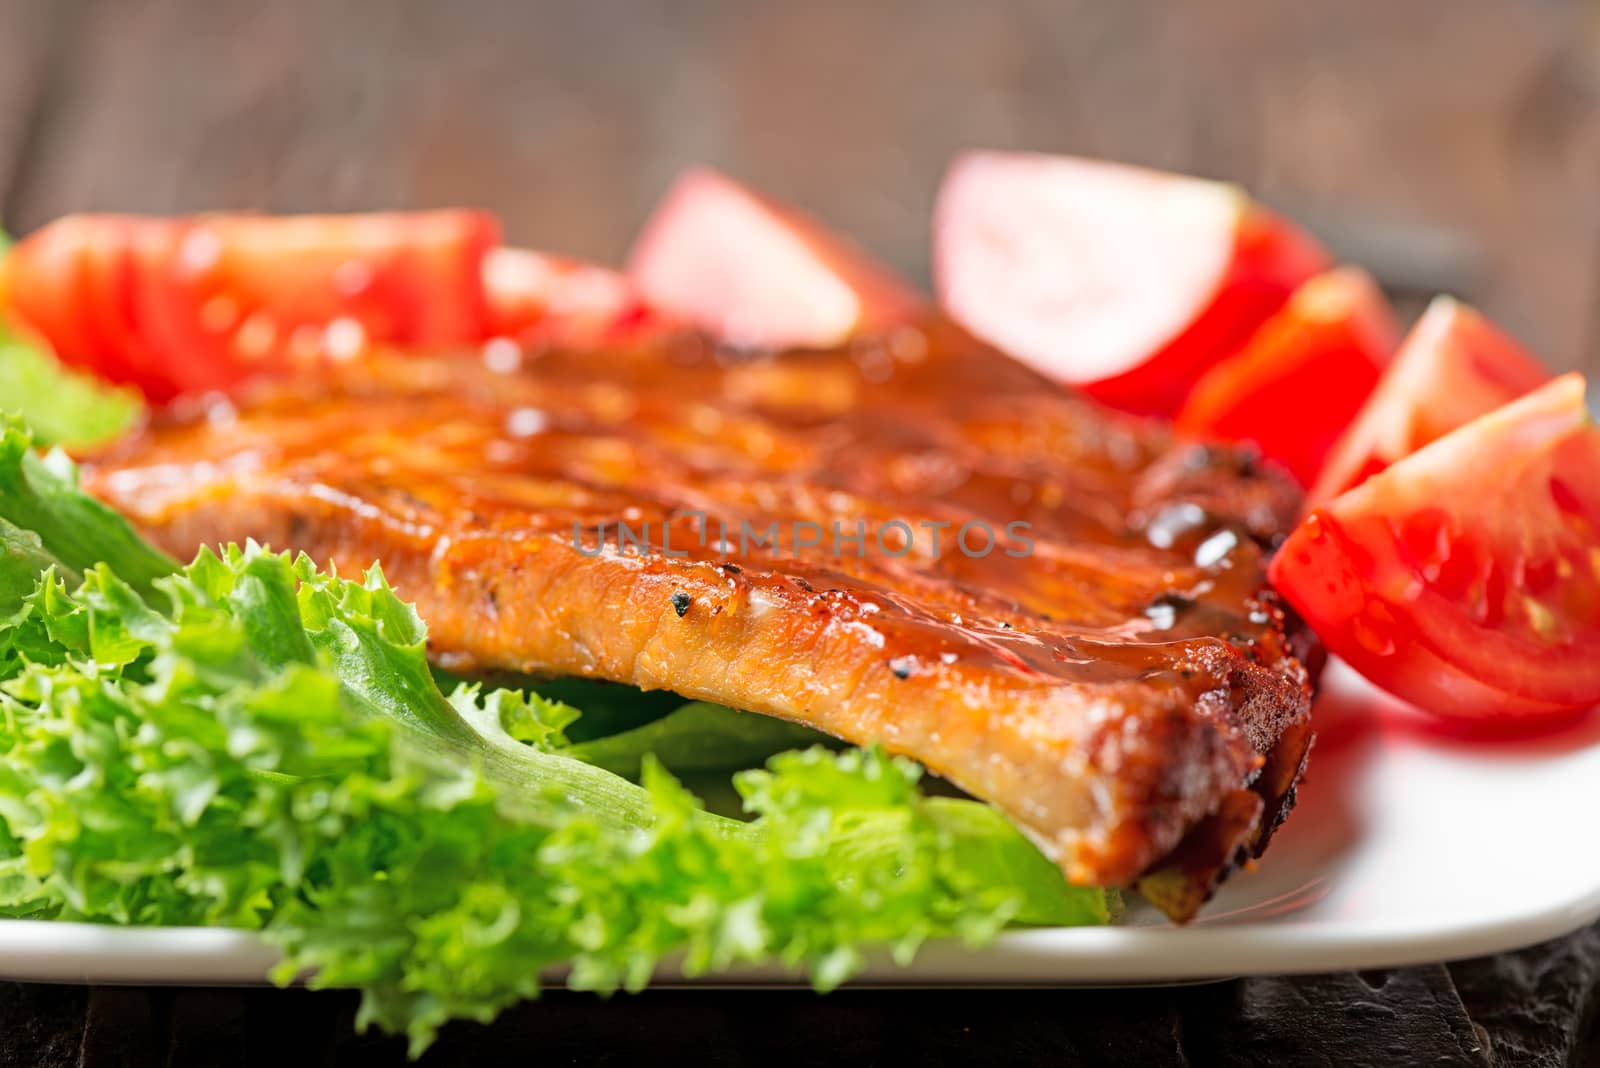 Delicious barbecued ribs seasoned with a spicy BBQ basting sauce by Nanisimova